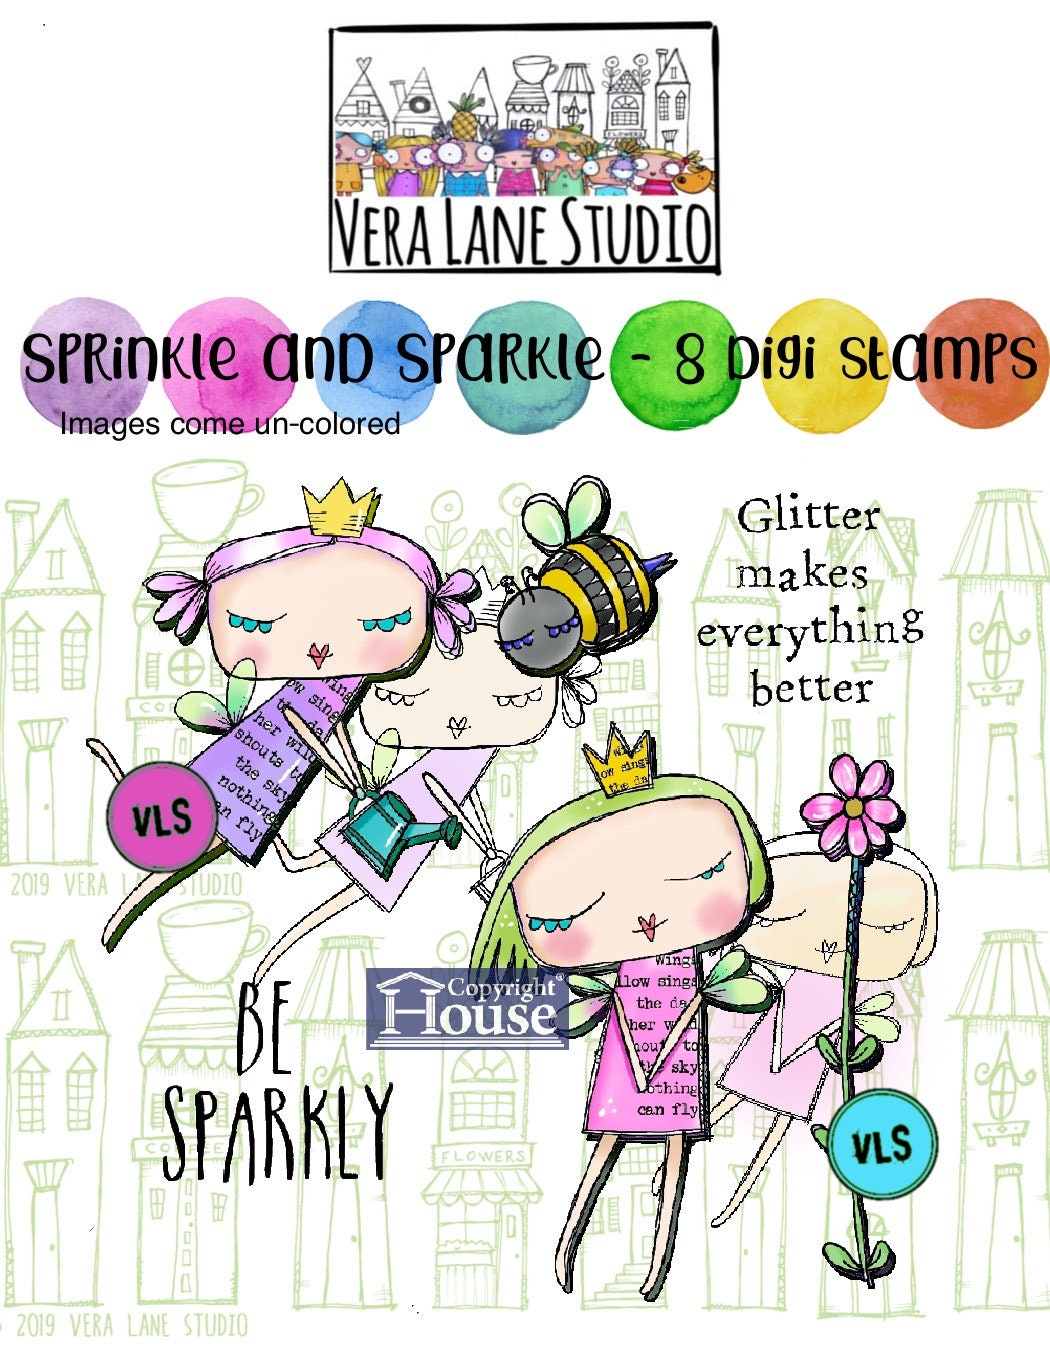 Sprinkle and Sparkle - fairy sisiters in an 8 digi stamp set available for instant download